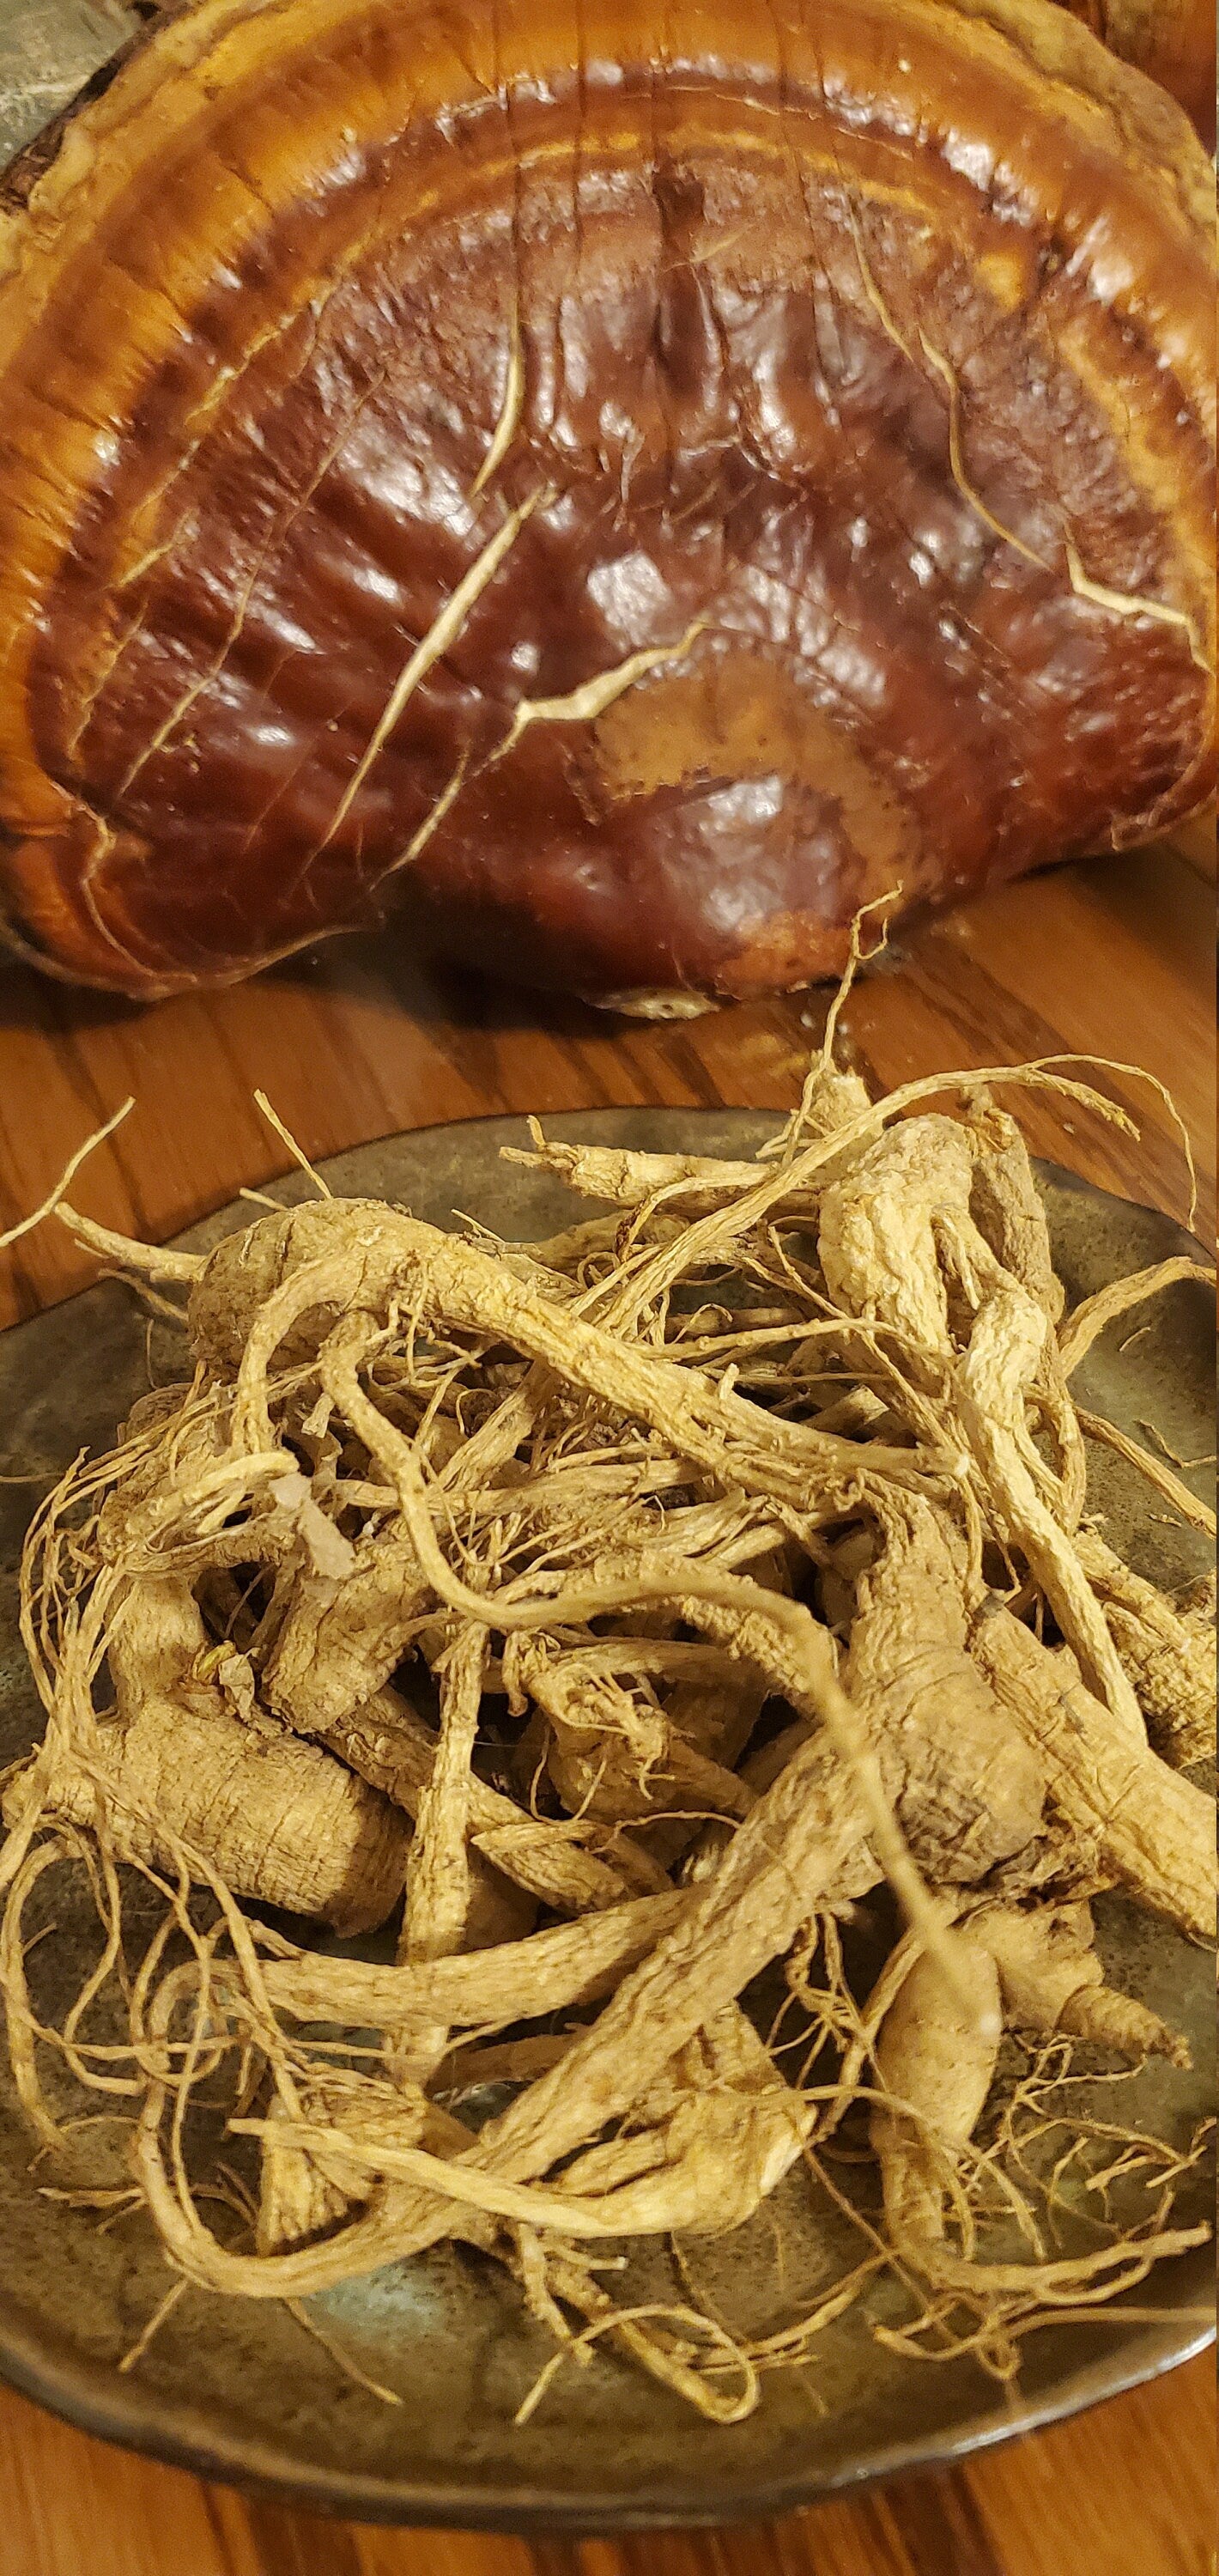 American Ginseng (Panax quinquefolia) - Dried Whole Root